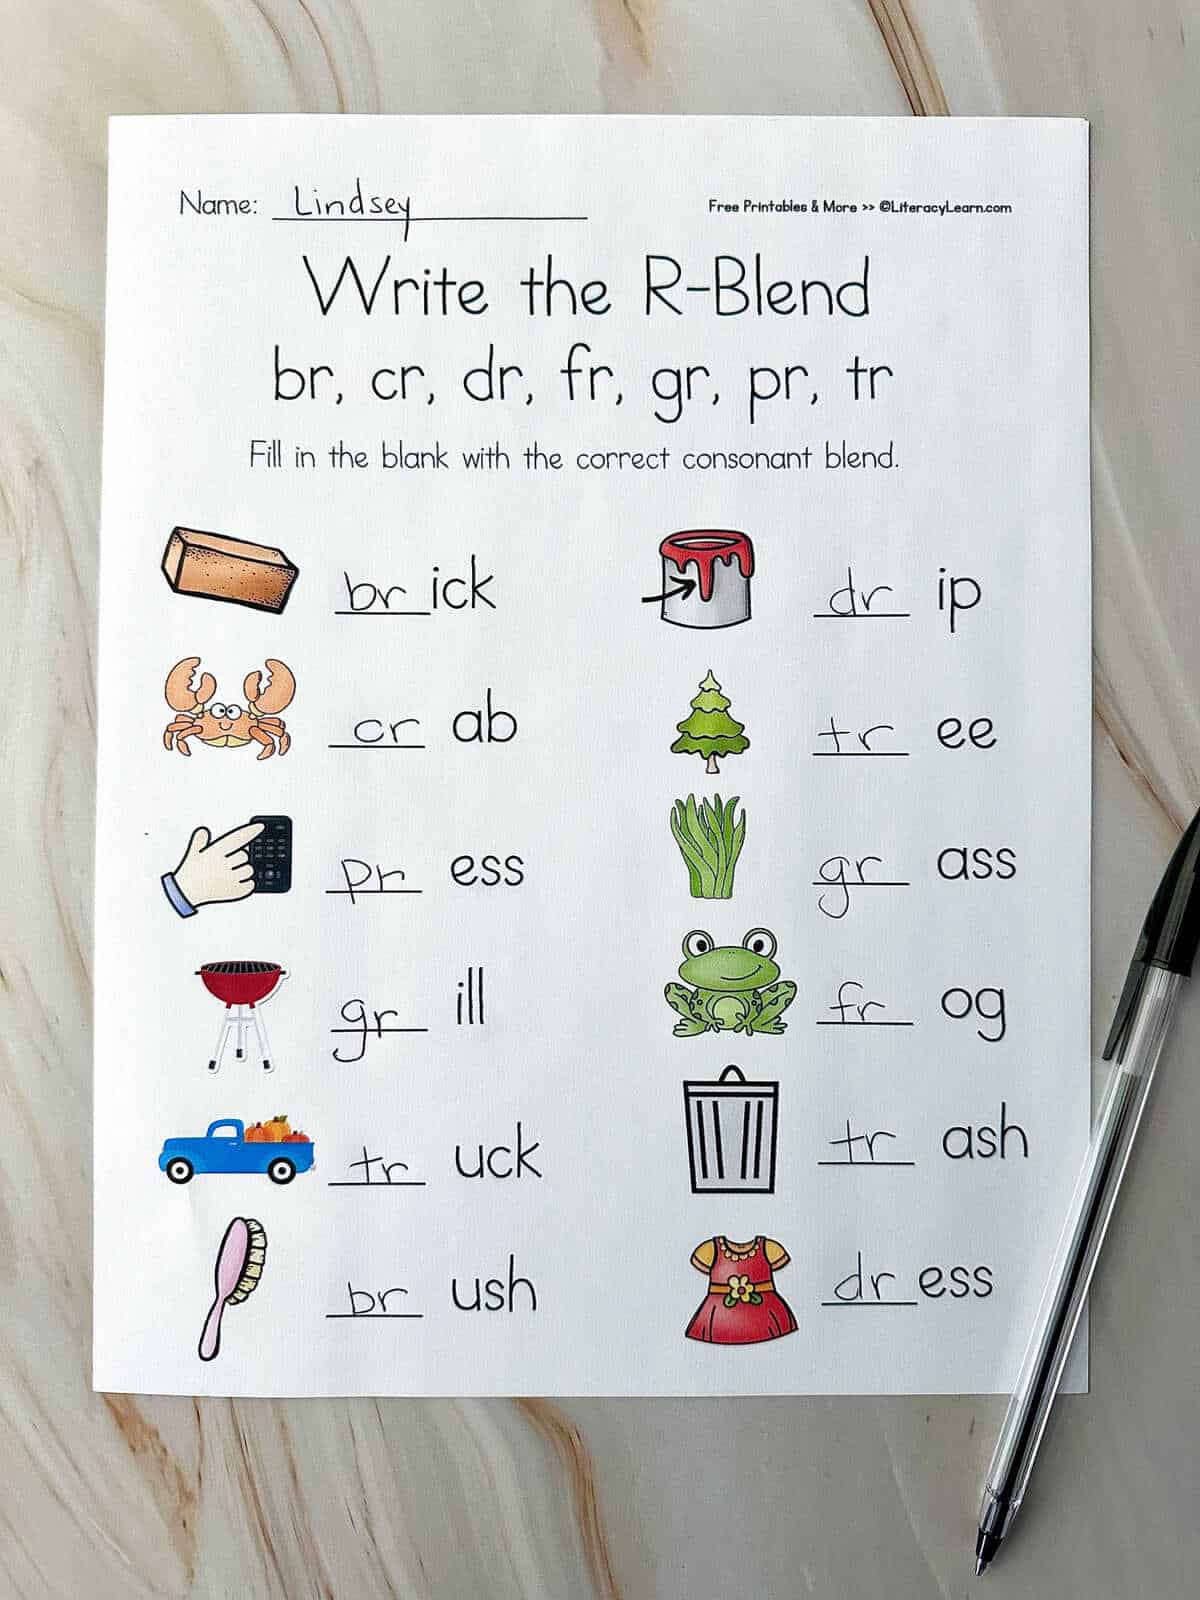 A printed and completed worksheet where students must write in the matching r-blend for each picture.